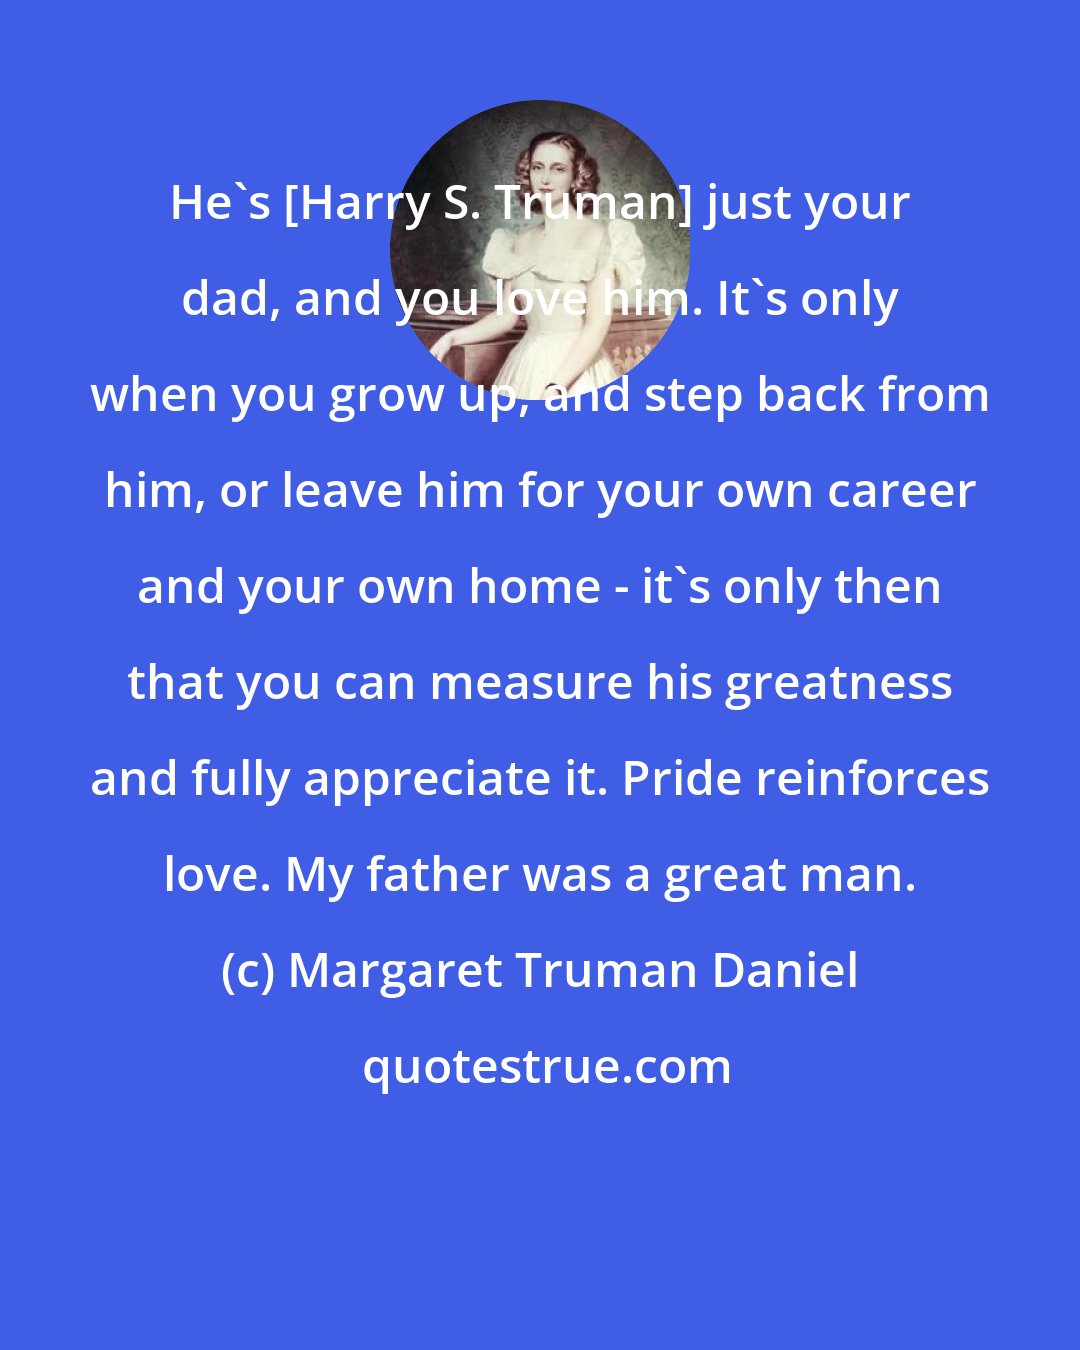 Margaret Truman Daniel: He's [Harry S. Truman] just your dad, and you love him. It's only when you grow up, and step back from him, or leave him for your own career and your own home - it's only then that you can measure his greatness and fully appreciate it. Pride reinforces love. My father was a great man.